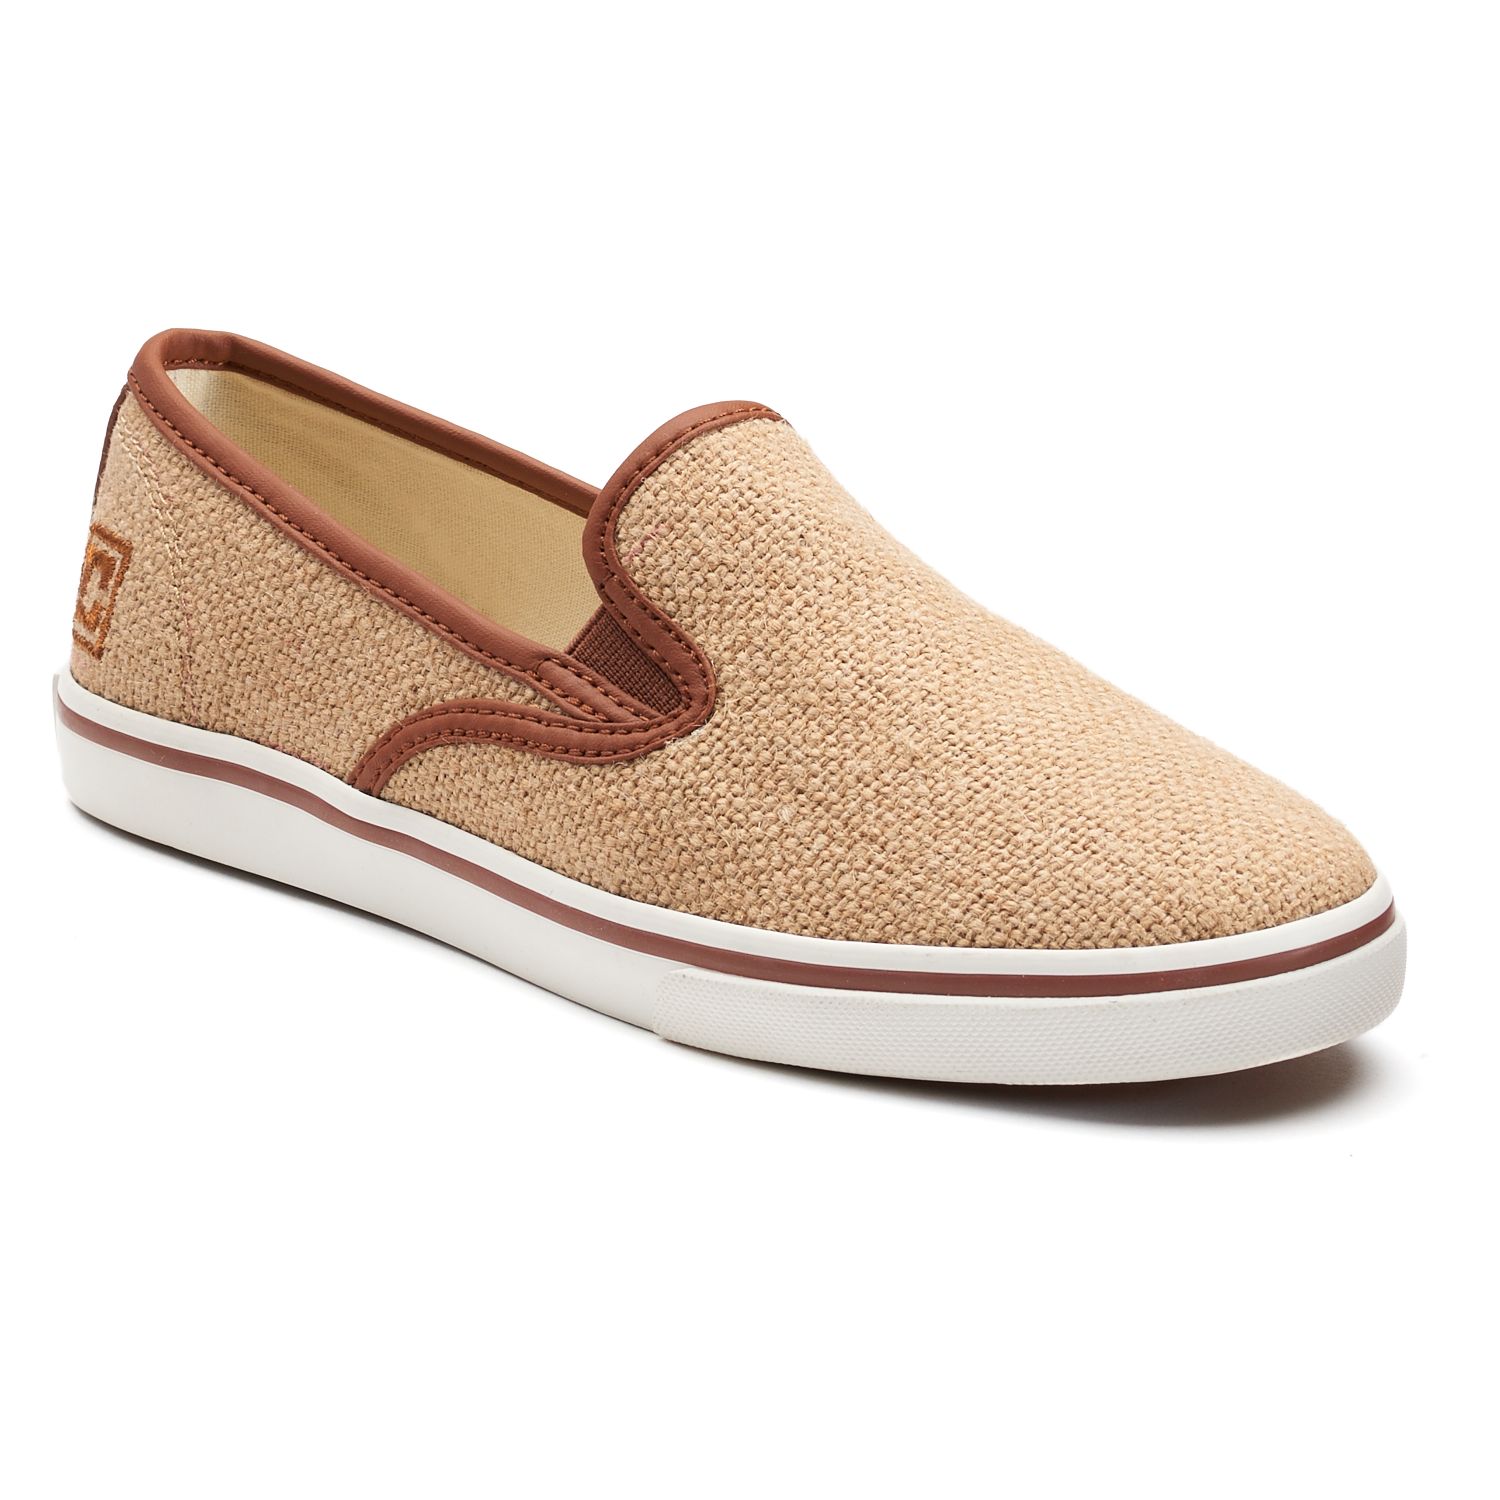 Chaps Jessica Women's Slip-On Shoes